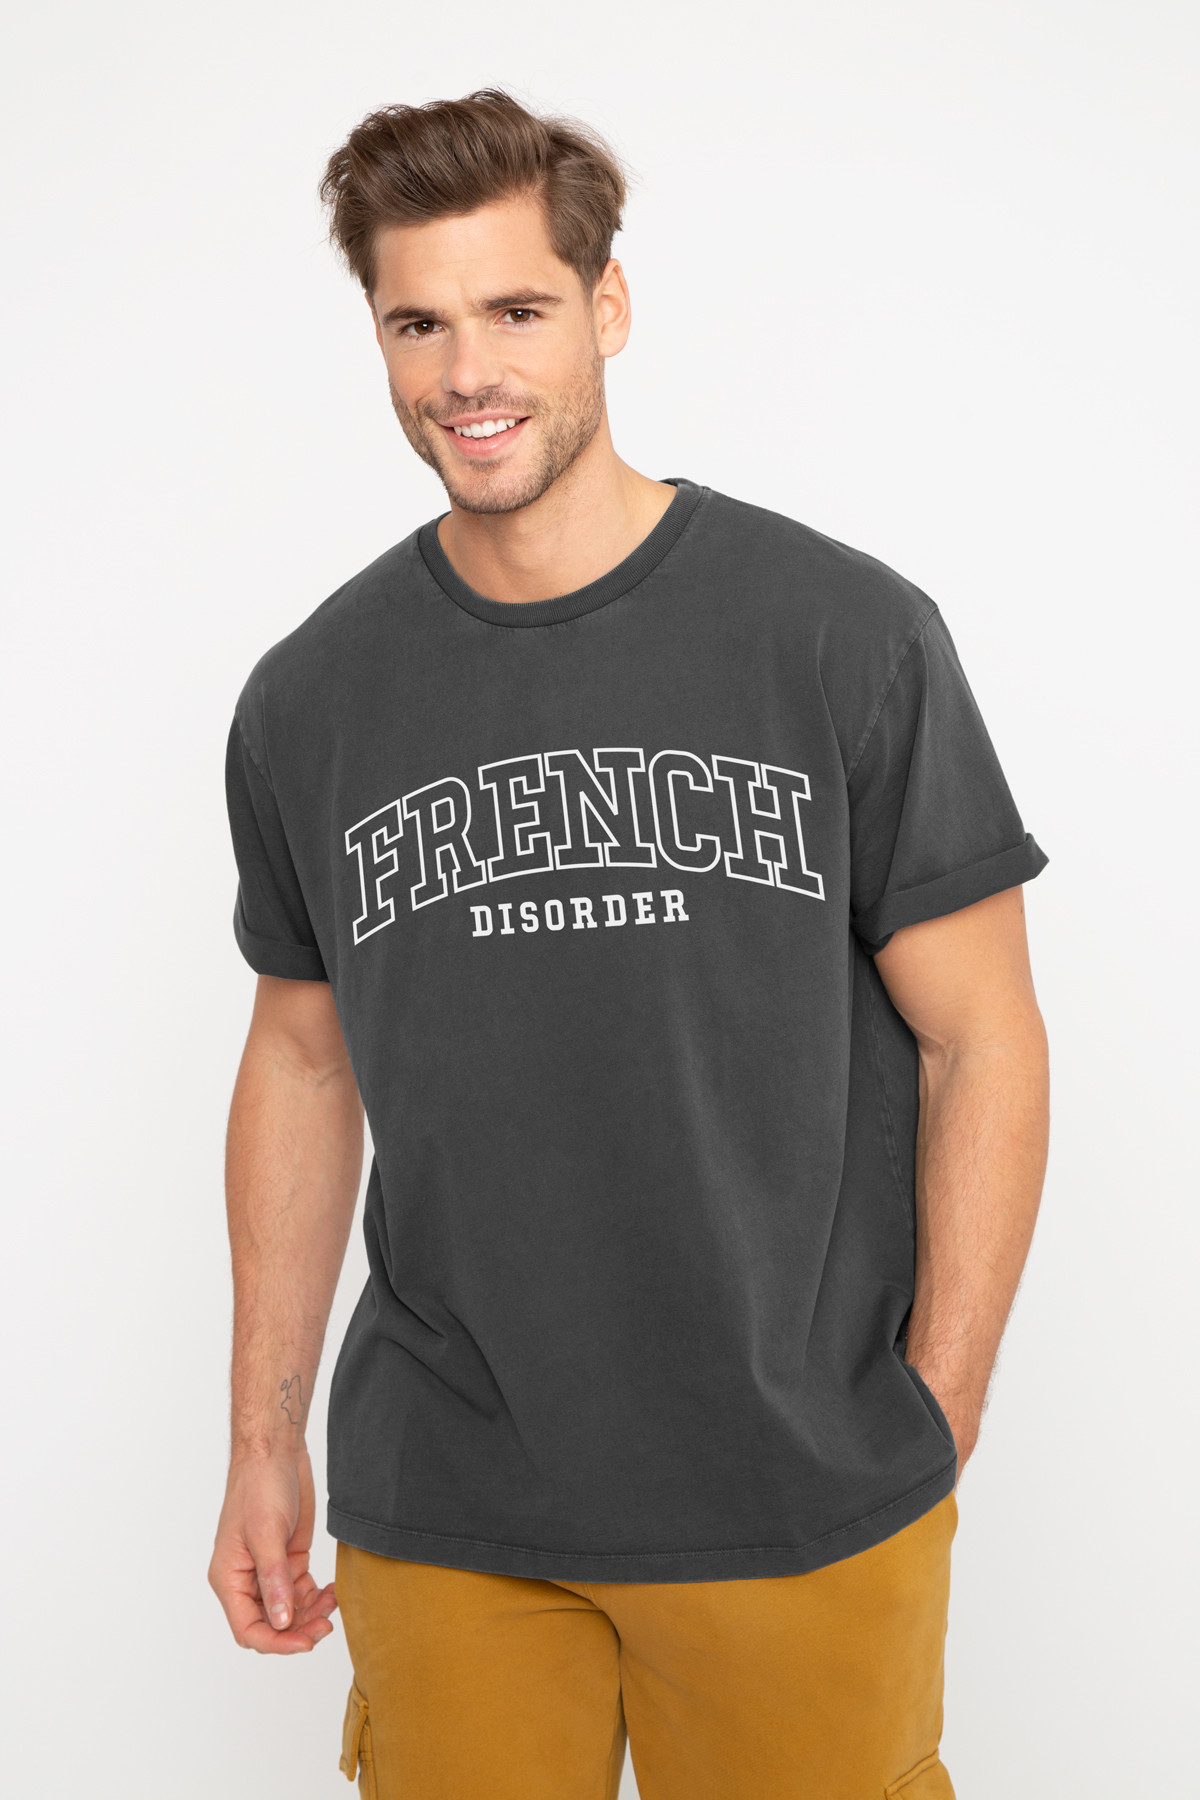 Tshirt Washed FRENCH DISORDER